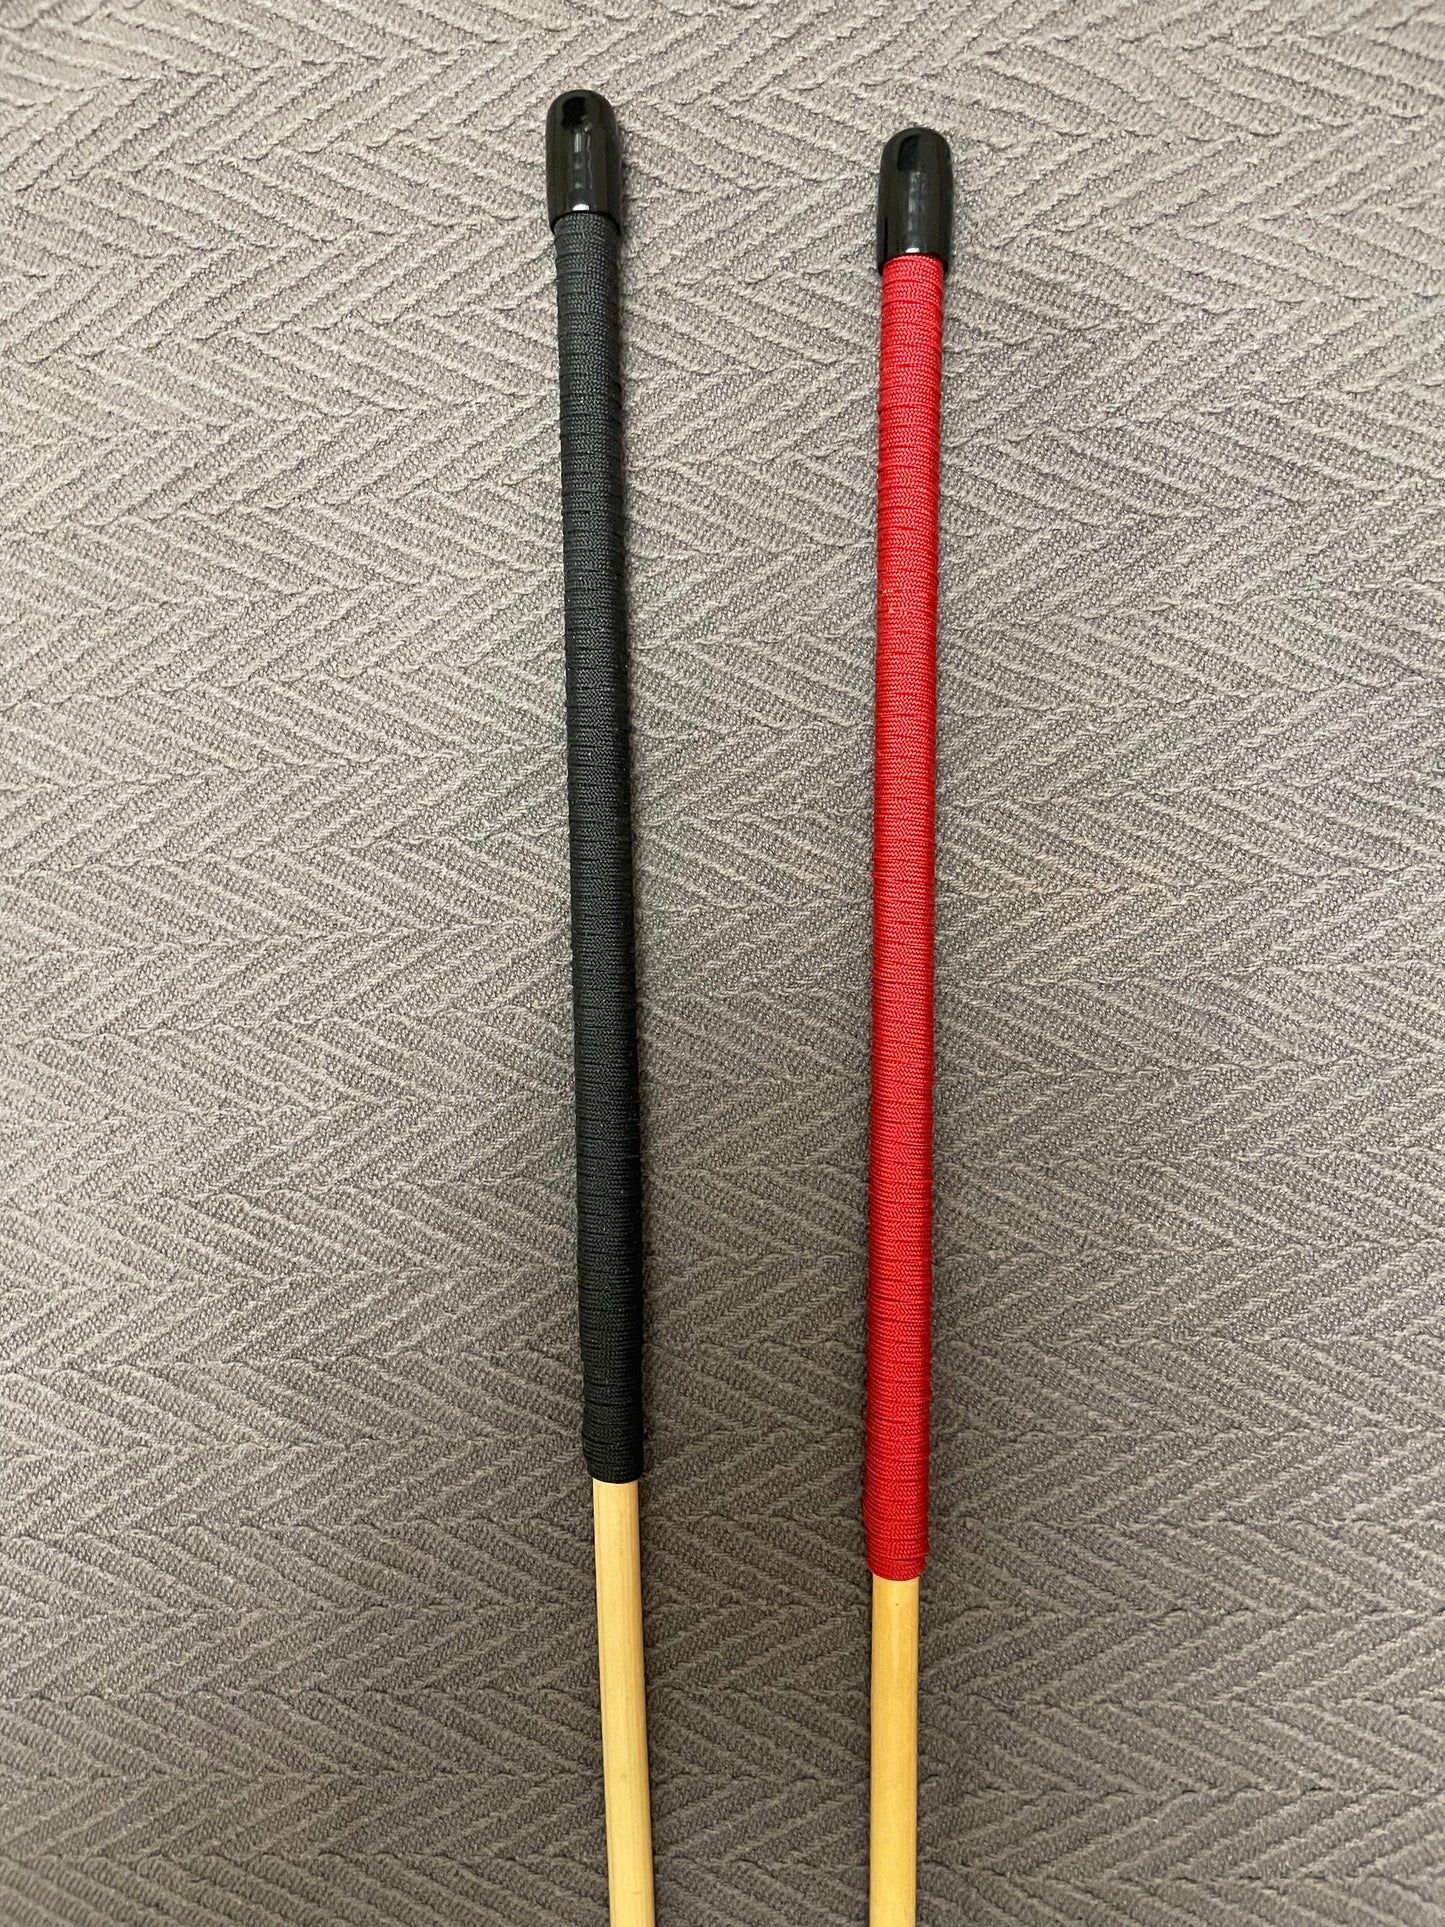 The Scorpion - Whippy Classic Dragon Punishment Cane - 105 cms L  & 8 - 9 mm Diameter - 14" BLACK / RED  Paracord  Handles - Englishvice Canes